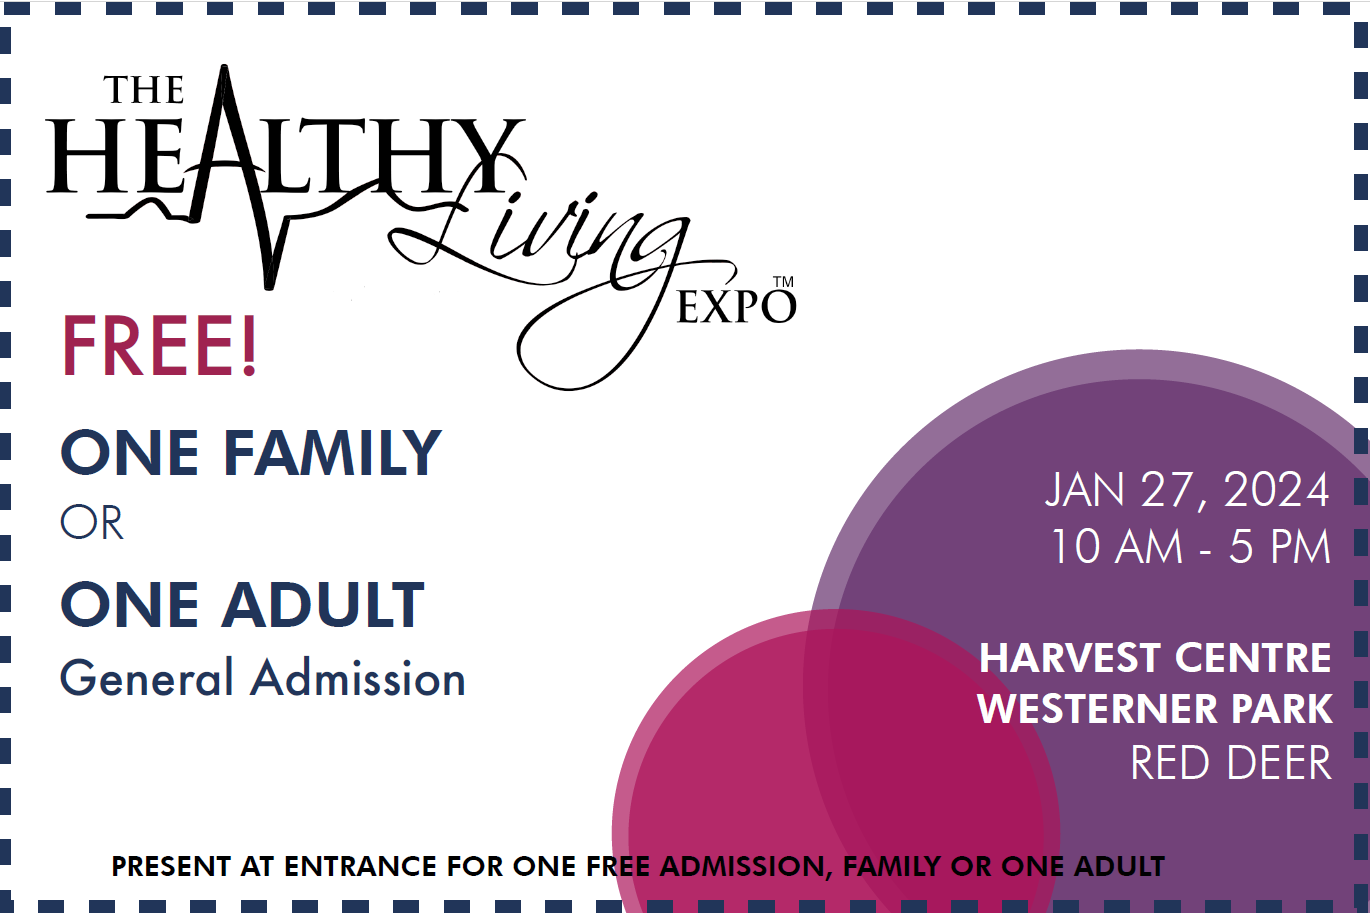 Next Happening: Free Tickets  Included - Visit Us at the Healthy Living Expo this Saturday